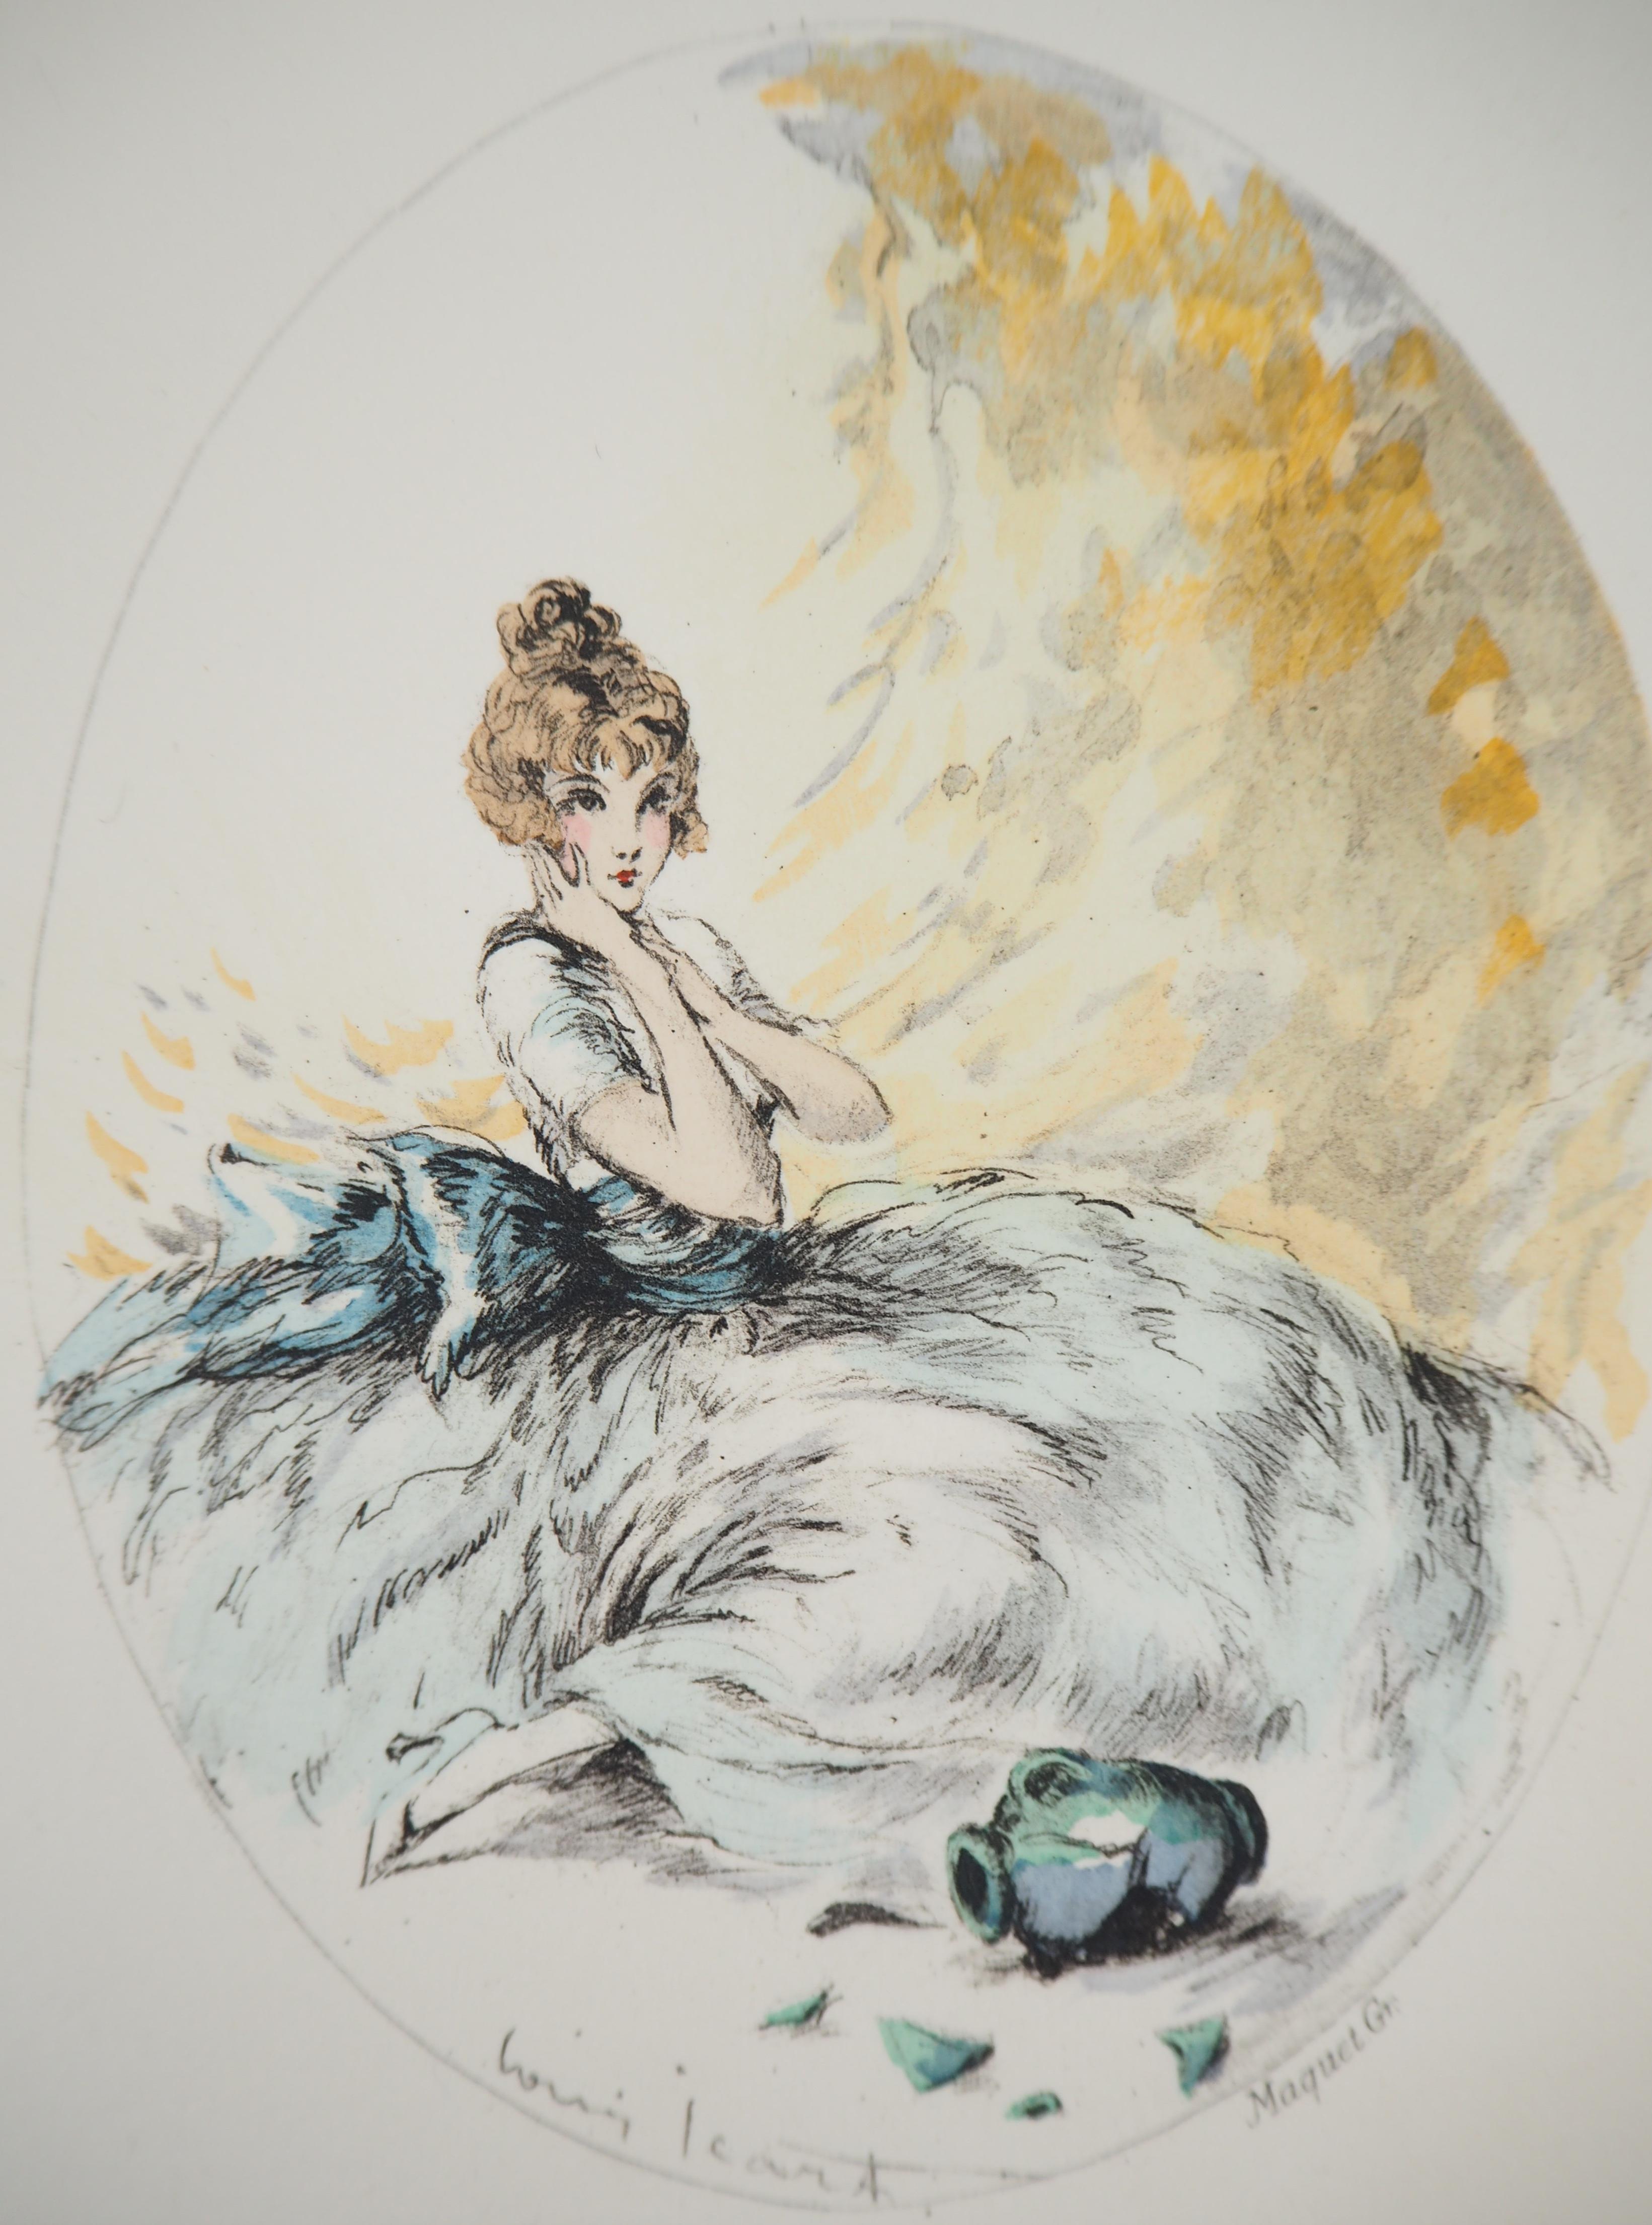 Woman and the Broken Pot - Original etching - Gray Figurative Print by Louis Icart